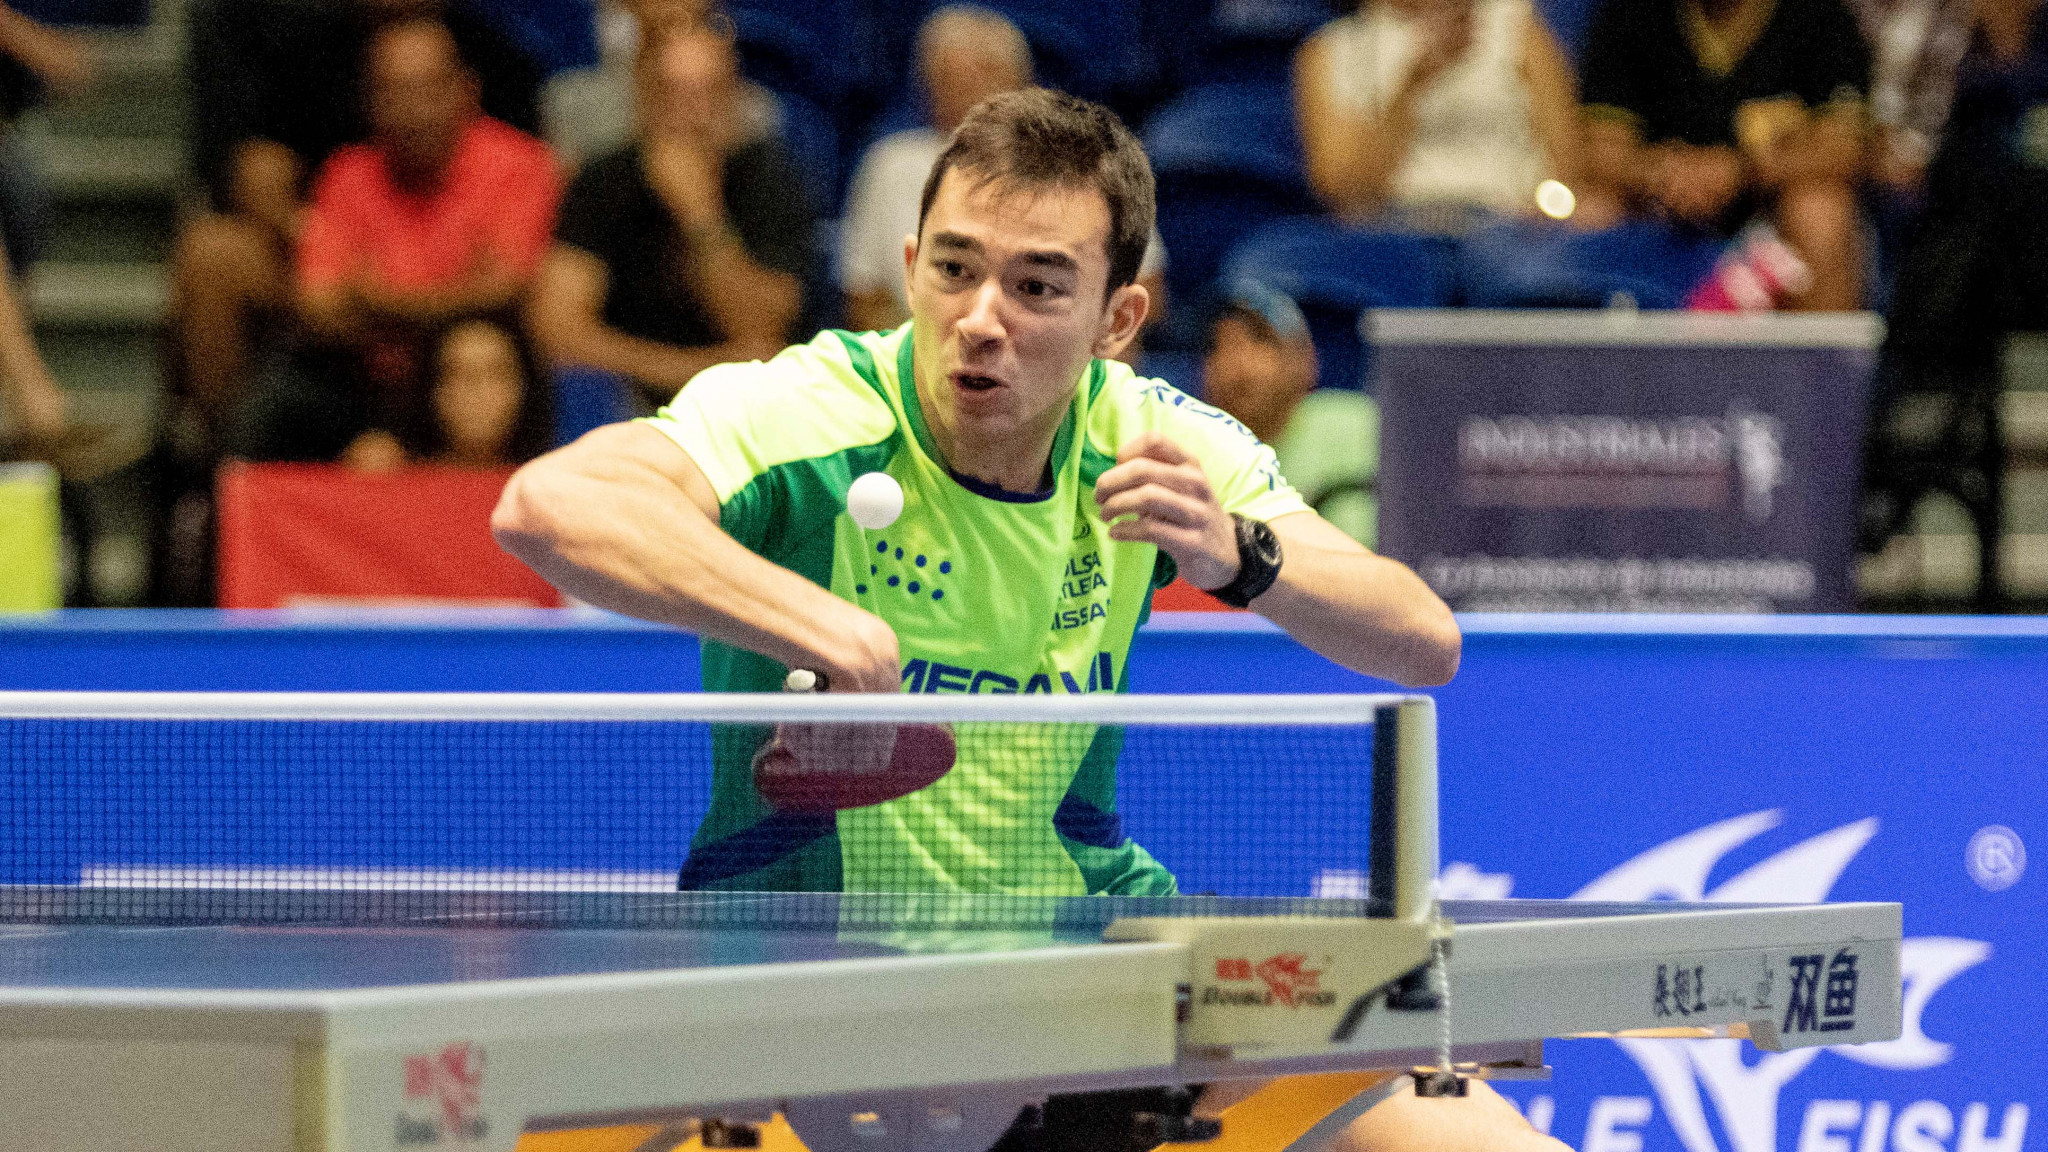 Brazil's Hugo Calderano will defend his men's singles title at the ITTF Pan American Cup that starts in Puerto Rico tomorrow ©ITTF